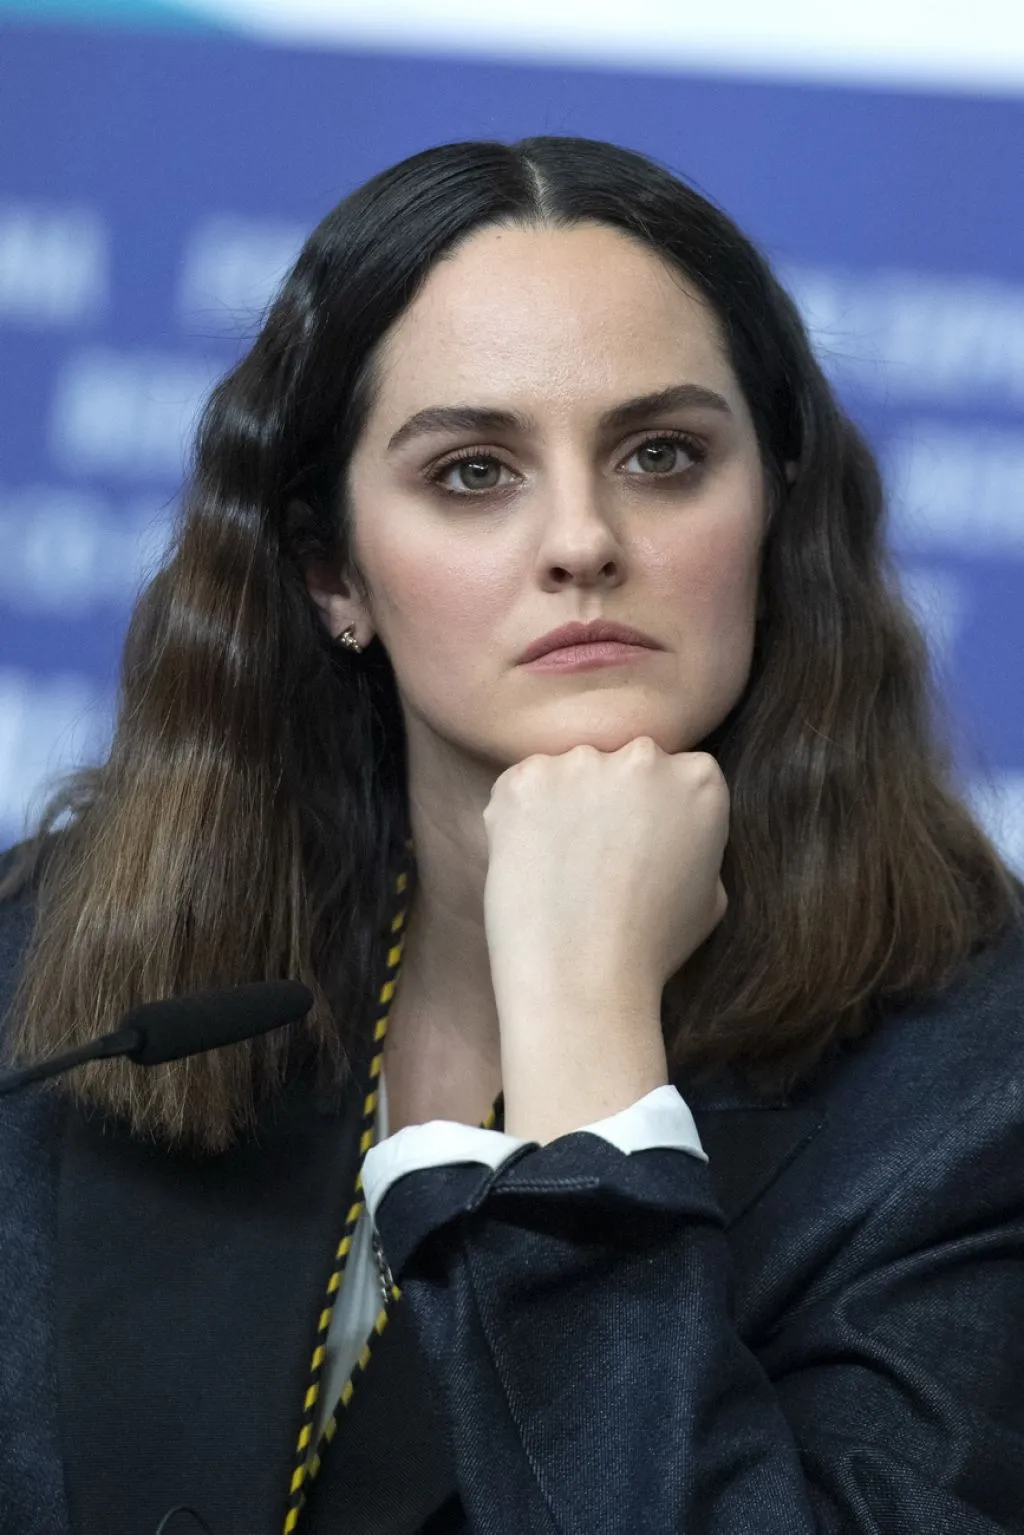 NOEMIE MERLANT AT PRESS CONFERENCE AT THE 2022 BERLIN INTERNATIONAL FILM FESTIVAL